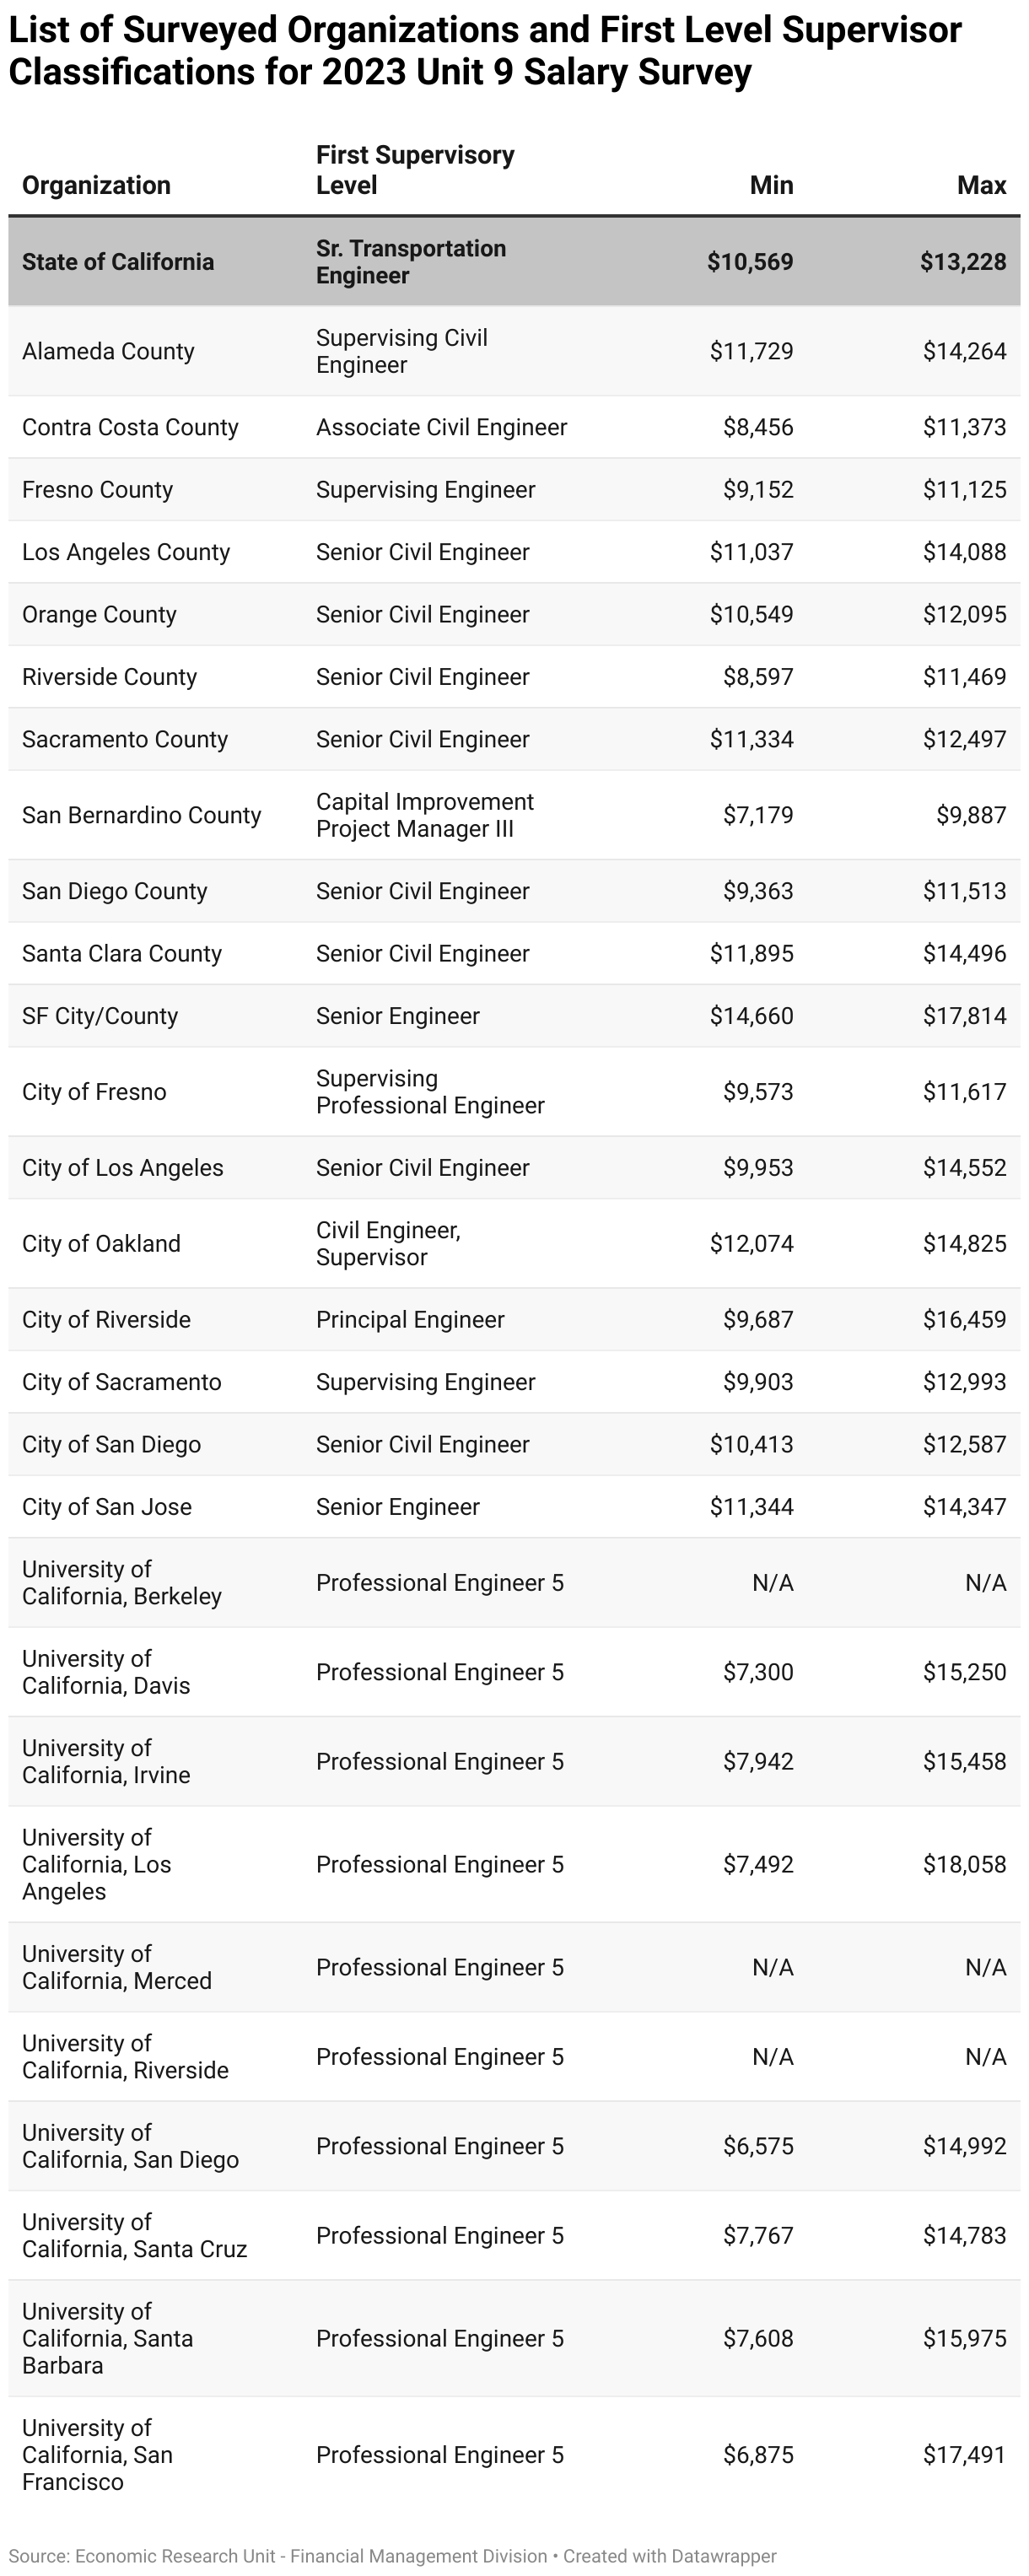 The following chart shows the minimum and maximum salaries for the first level supervisor classifications for the different organizations involved in the Unit 9 Salary Survey. The State of California first level supervisor position is Sr. Transportation Engineer and has a minimum salary of $10,569 and a maximum salary of $13,228. Many of the organizations in the Unit 9 Salary Survey have a higher minimum salary and a higher maximum salary for their first level supervisor classification than the State.